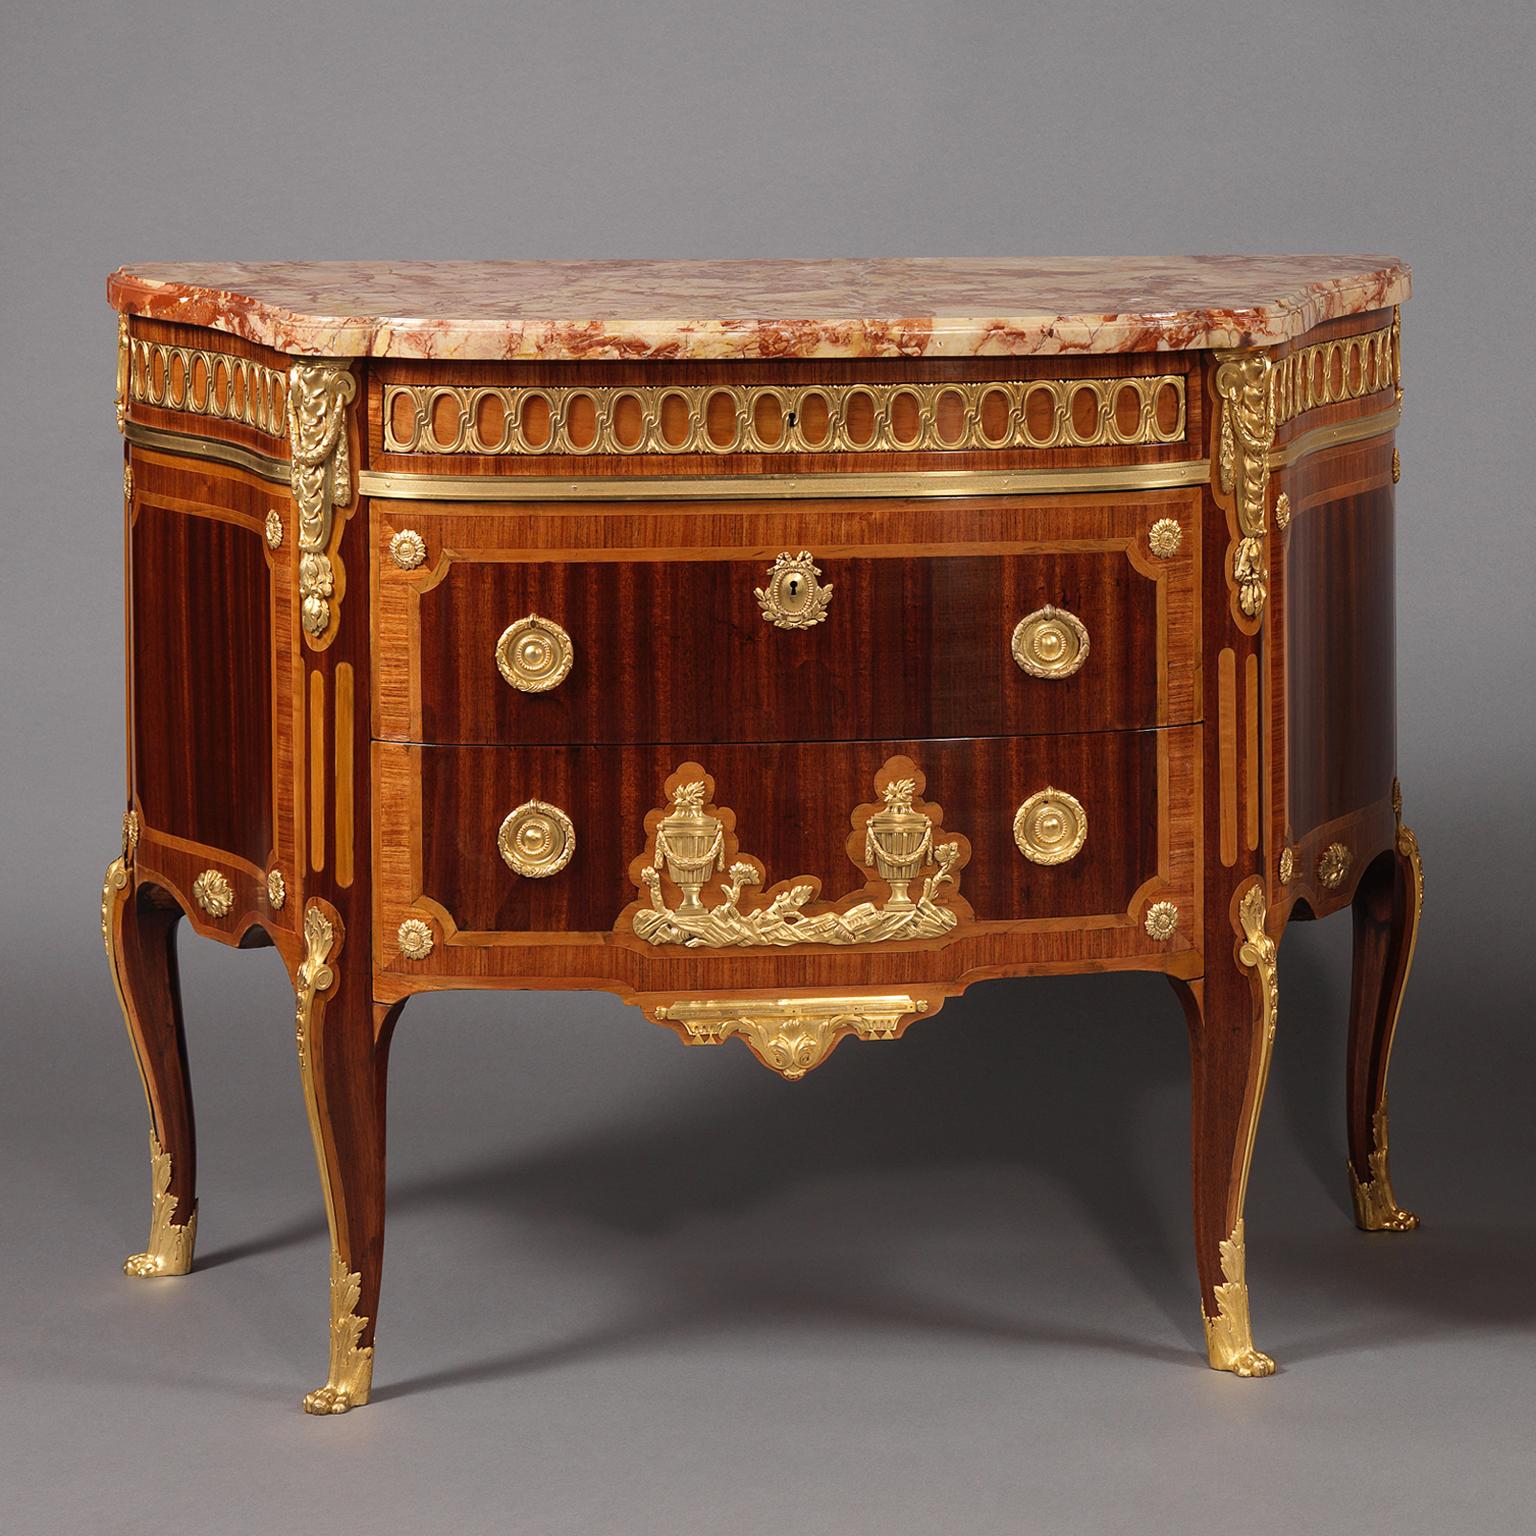 A Fine Pair of Transitional Style Gilt-Bronze Mounted Parquetry Commodes, by Paul Sormani, After the Model by Charles Topino.

Stamped beneath the marble top to one commode ‘SORMANI’ also stamped on the lockplate ‘P. SORMANI , PARIS., 10 RUE